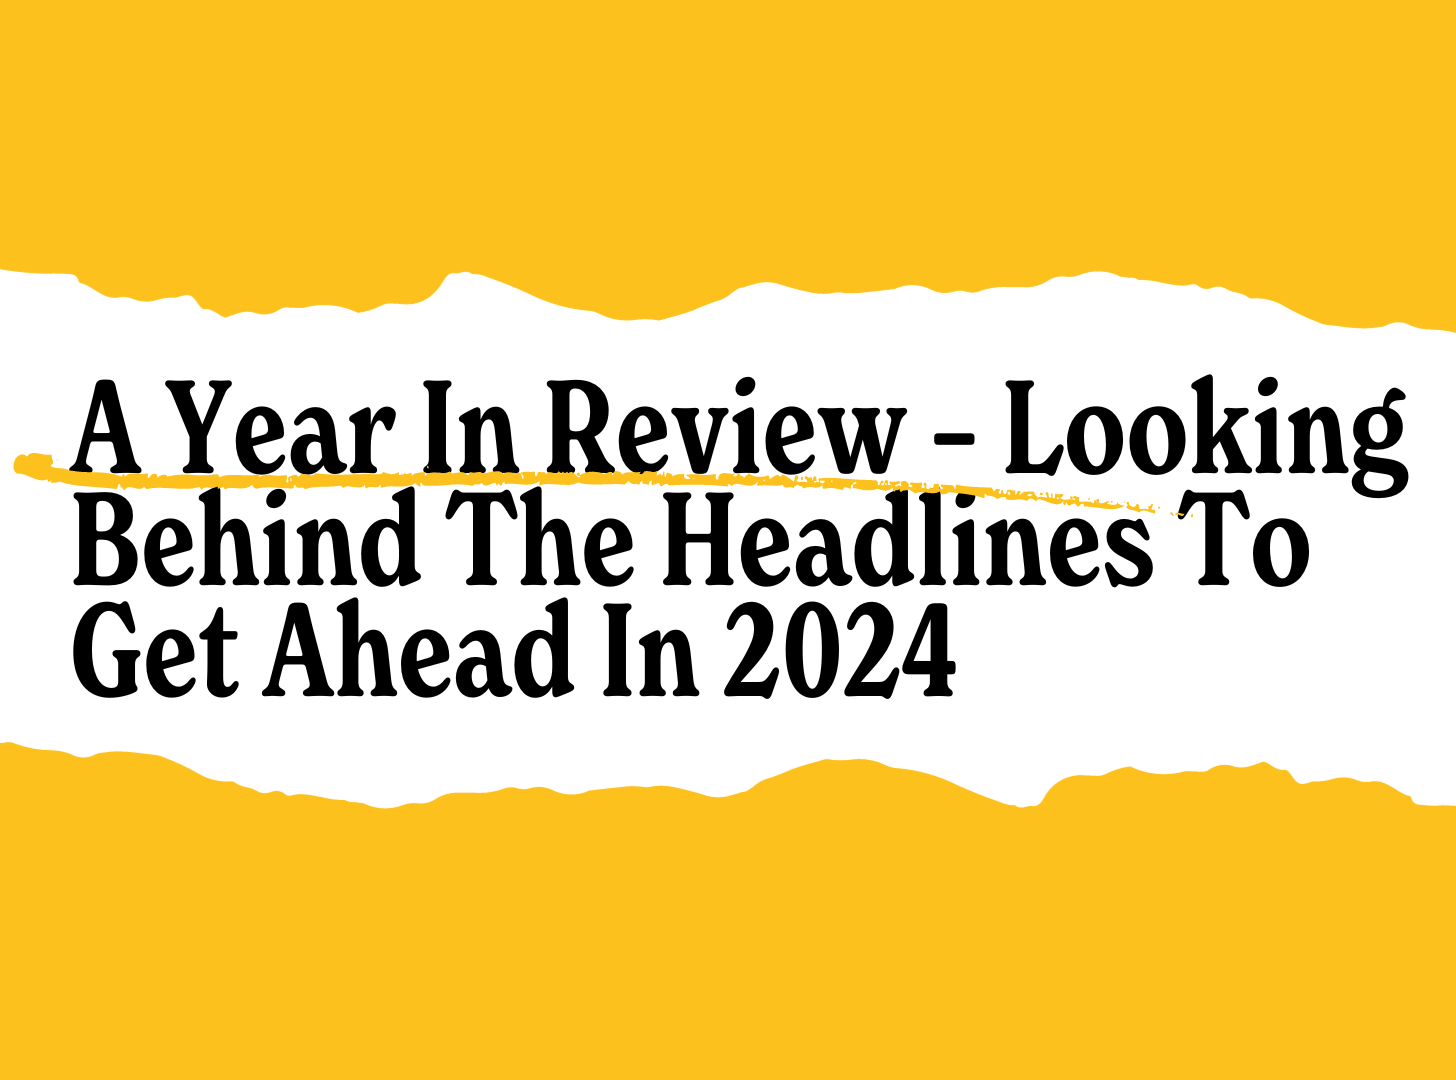 A Year In Review – Looking Behind The Headlines To Get Ahead In 2024